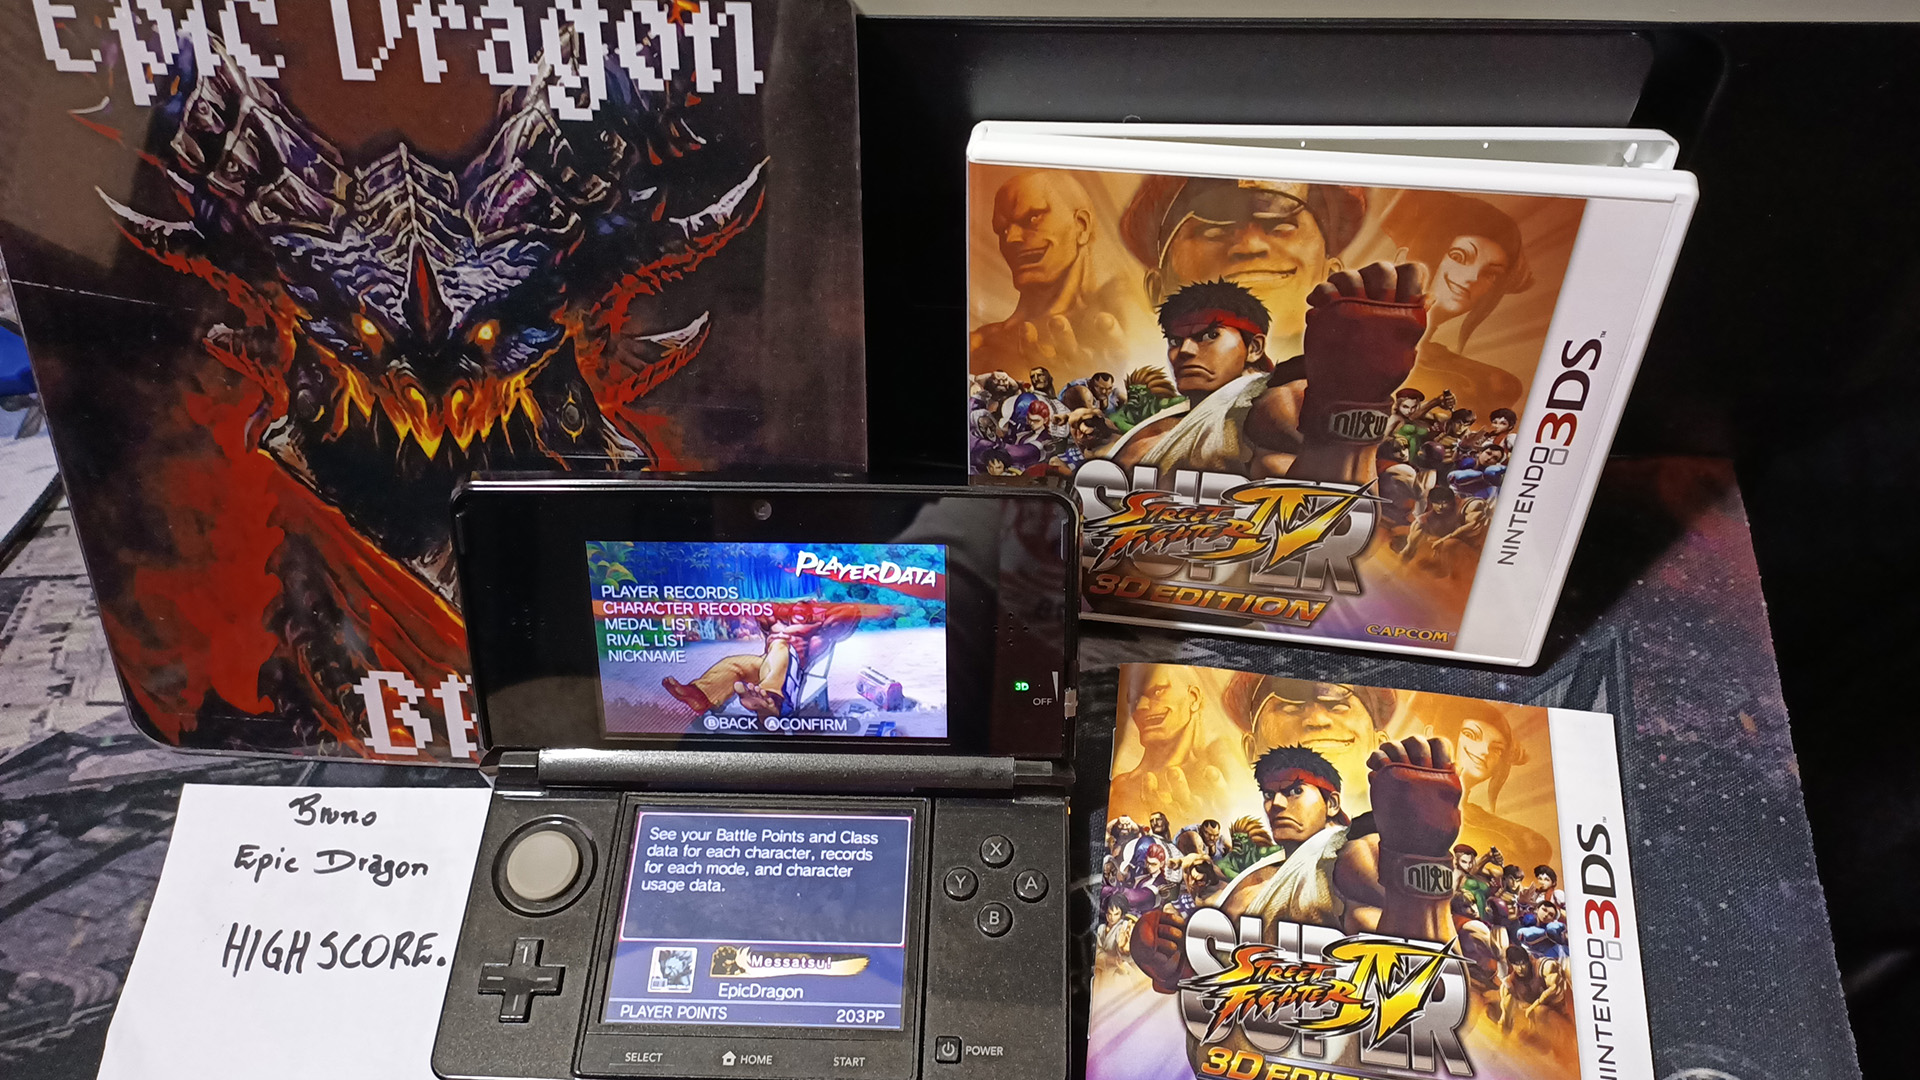 EpicDragon: Super Street Fighter IV 3D Edition: Arcade: Rufus (Nintendo 3DS) 594,800 points on 2022-08-17 21:07:35